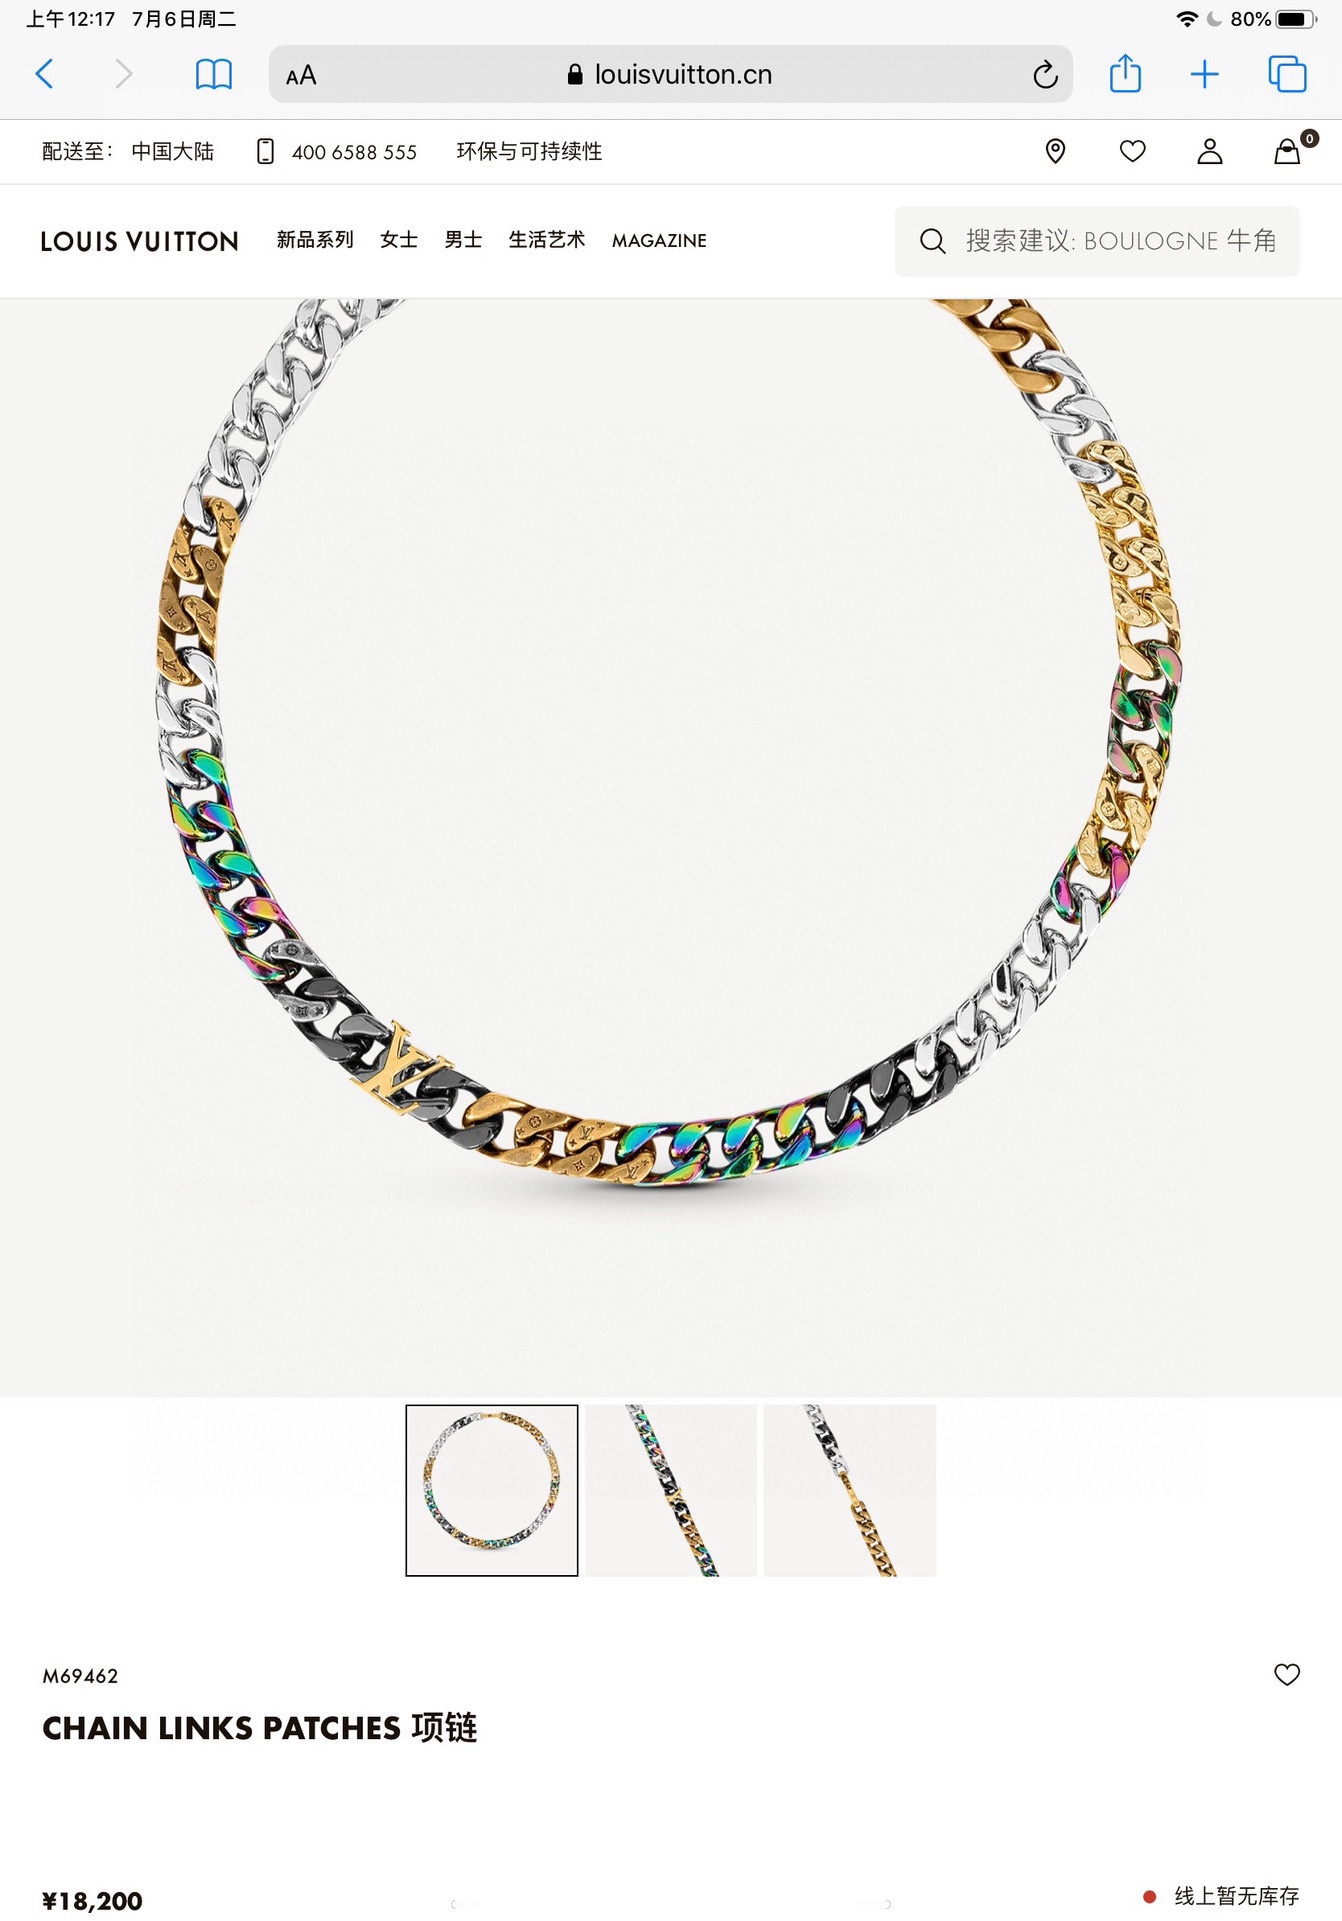 Louis Vuitton Jewelry Necklaces & Pendants Black Blue Gold Green Polishing Spring/Summer Collection Fashion Chains